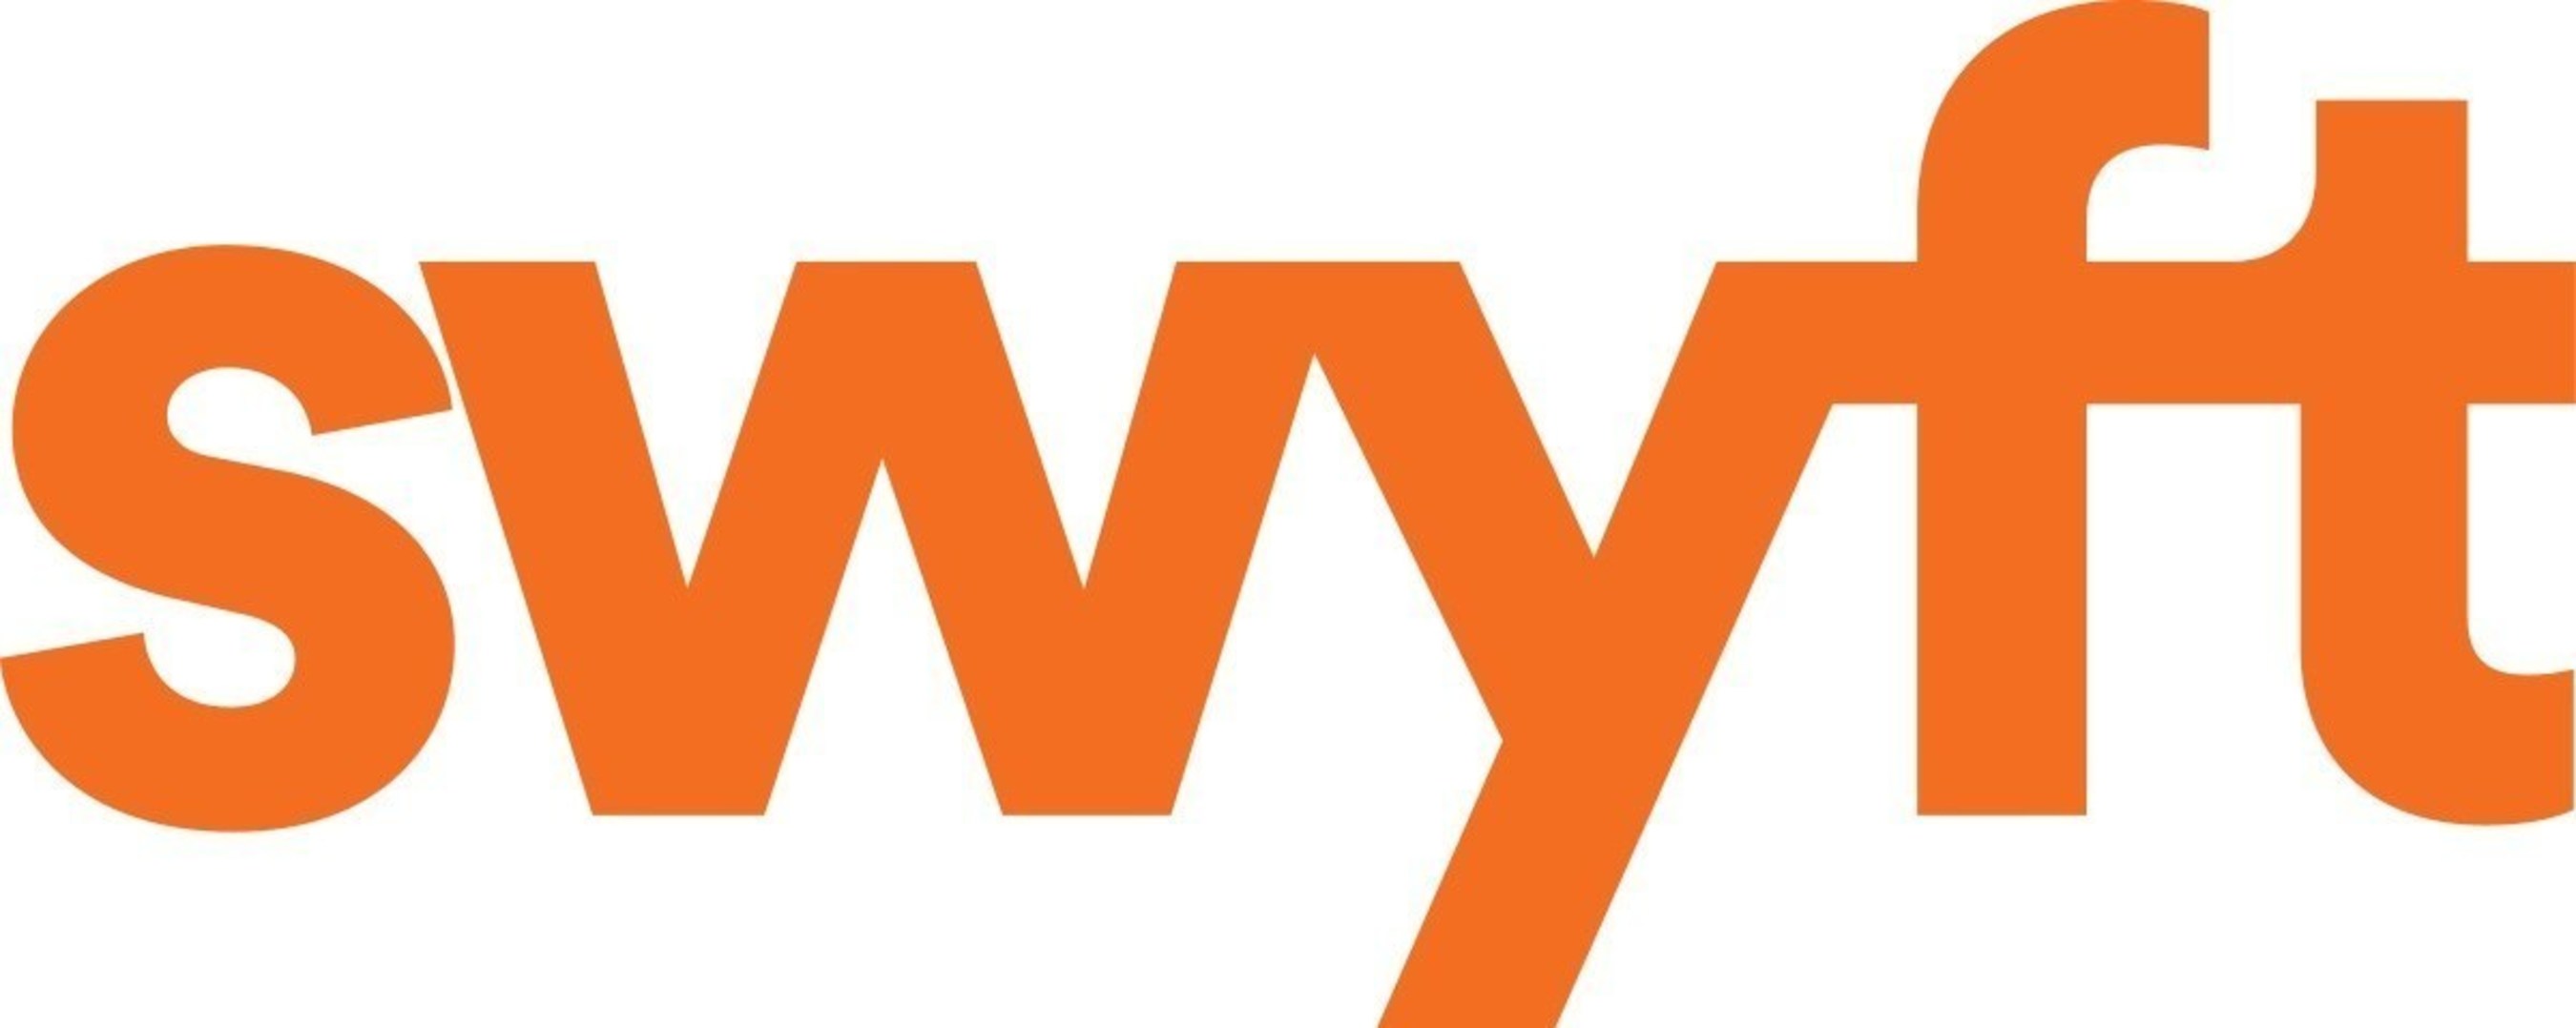 Swyft Inc. -- a leader in the automated retail industry -- is a technology and services company that increases sales and profits and enhances customer experiences for retailers, brands and independent operators using low-cost hardware, flexible cloud-based software and the efficient operating cost structures of the vending industry.